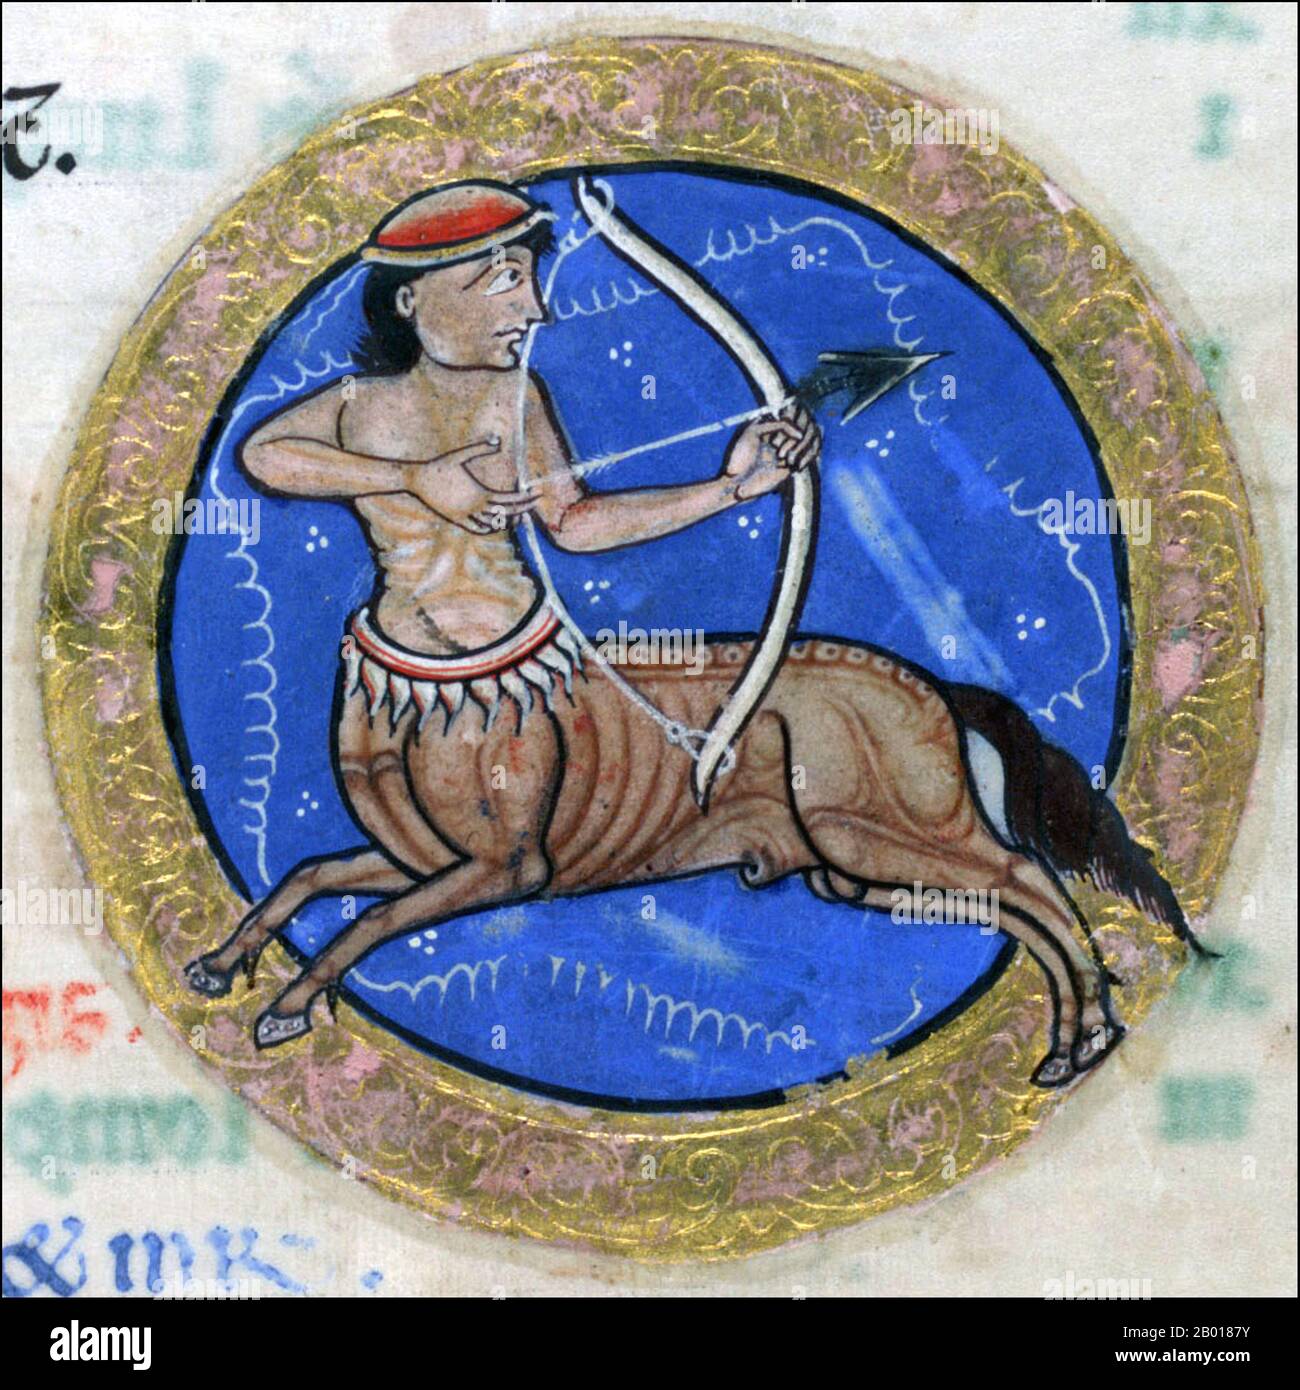 England: Zodiacal symbol for Sagittarius as represented in the Hunterian Psalter, c. 1170.  The Hunterian Psalter (or York Psalter) is an illuminated manuscript of the 12th century. It was produced in England some time around 1170, and is considered a striking example of Romanesque book art. The work is part of the collection of the Glasgow University Library, which acquired the book in 1807. It derives its colloquial name, the 'Hunterian Psalter', from having been part of the collection of 18th century Scottish anatomist and book collector William Hunter. Stock Photo